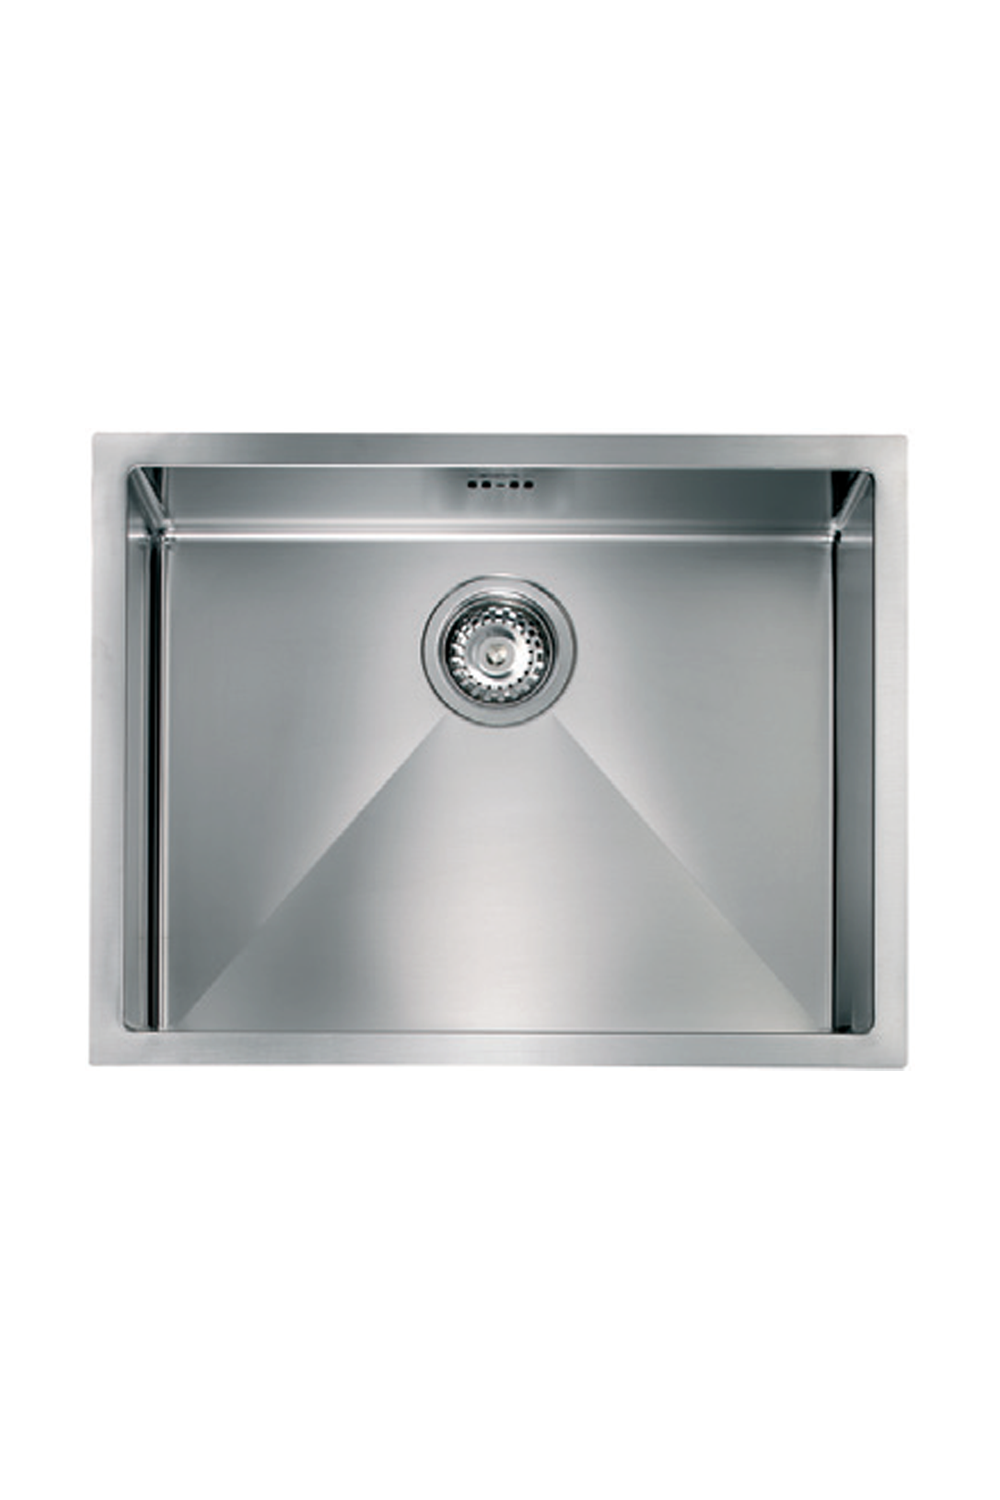 LUISINA 520mm R10-Corner Square Stainless Steel Sink 意大利製造小圓角不銹鋼星盆 | Made in Italy |